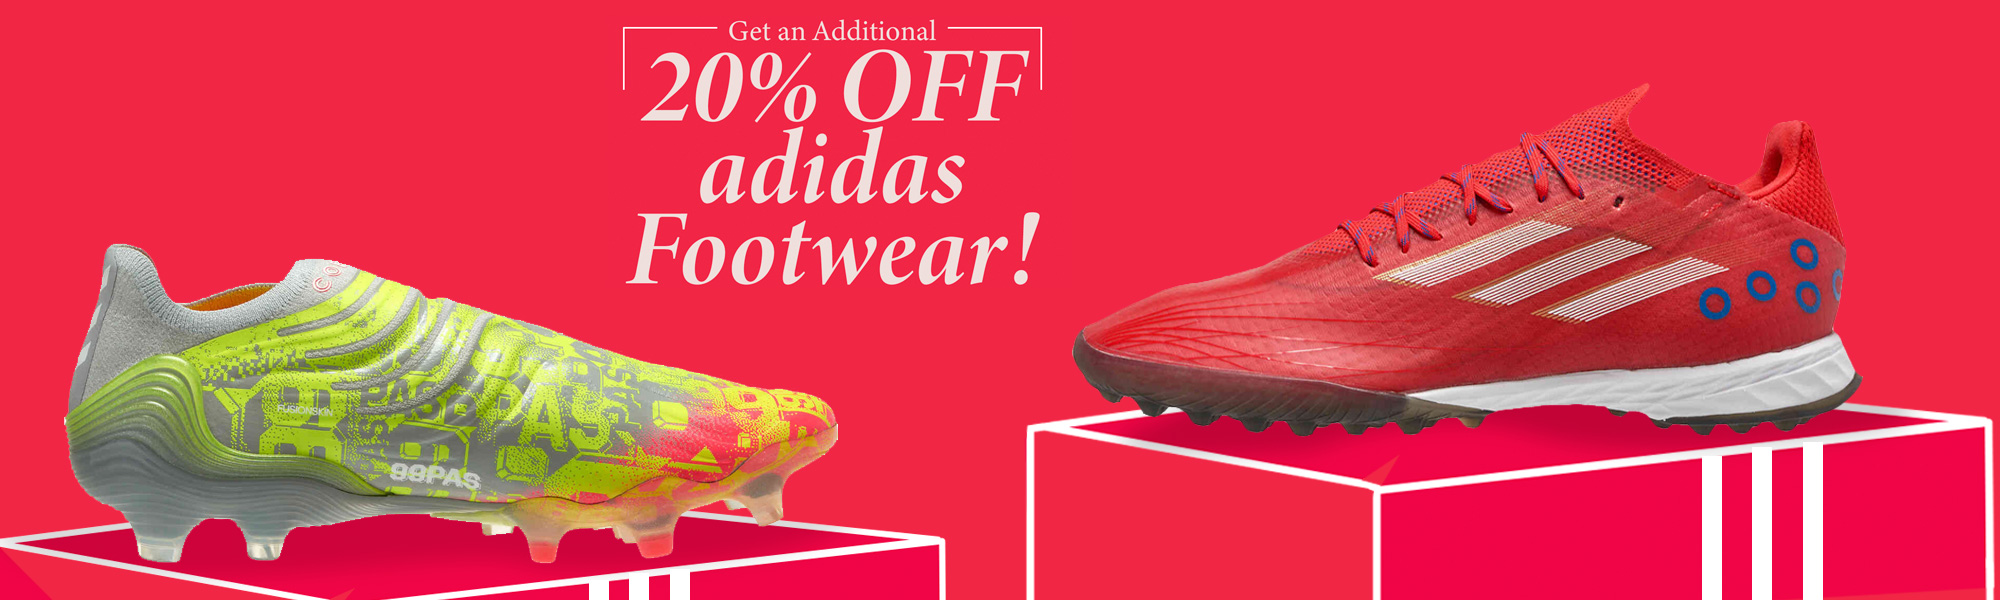 soccer shoes adidas sale